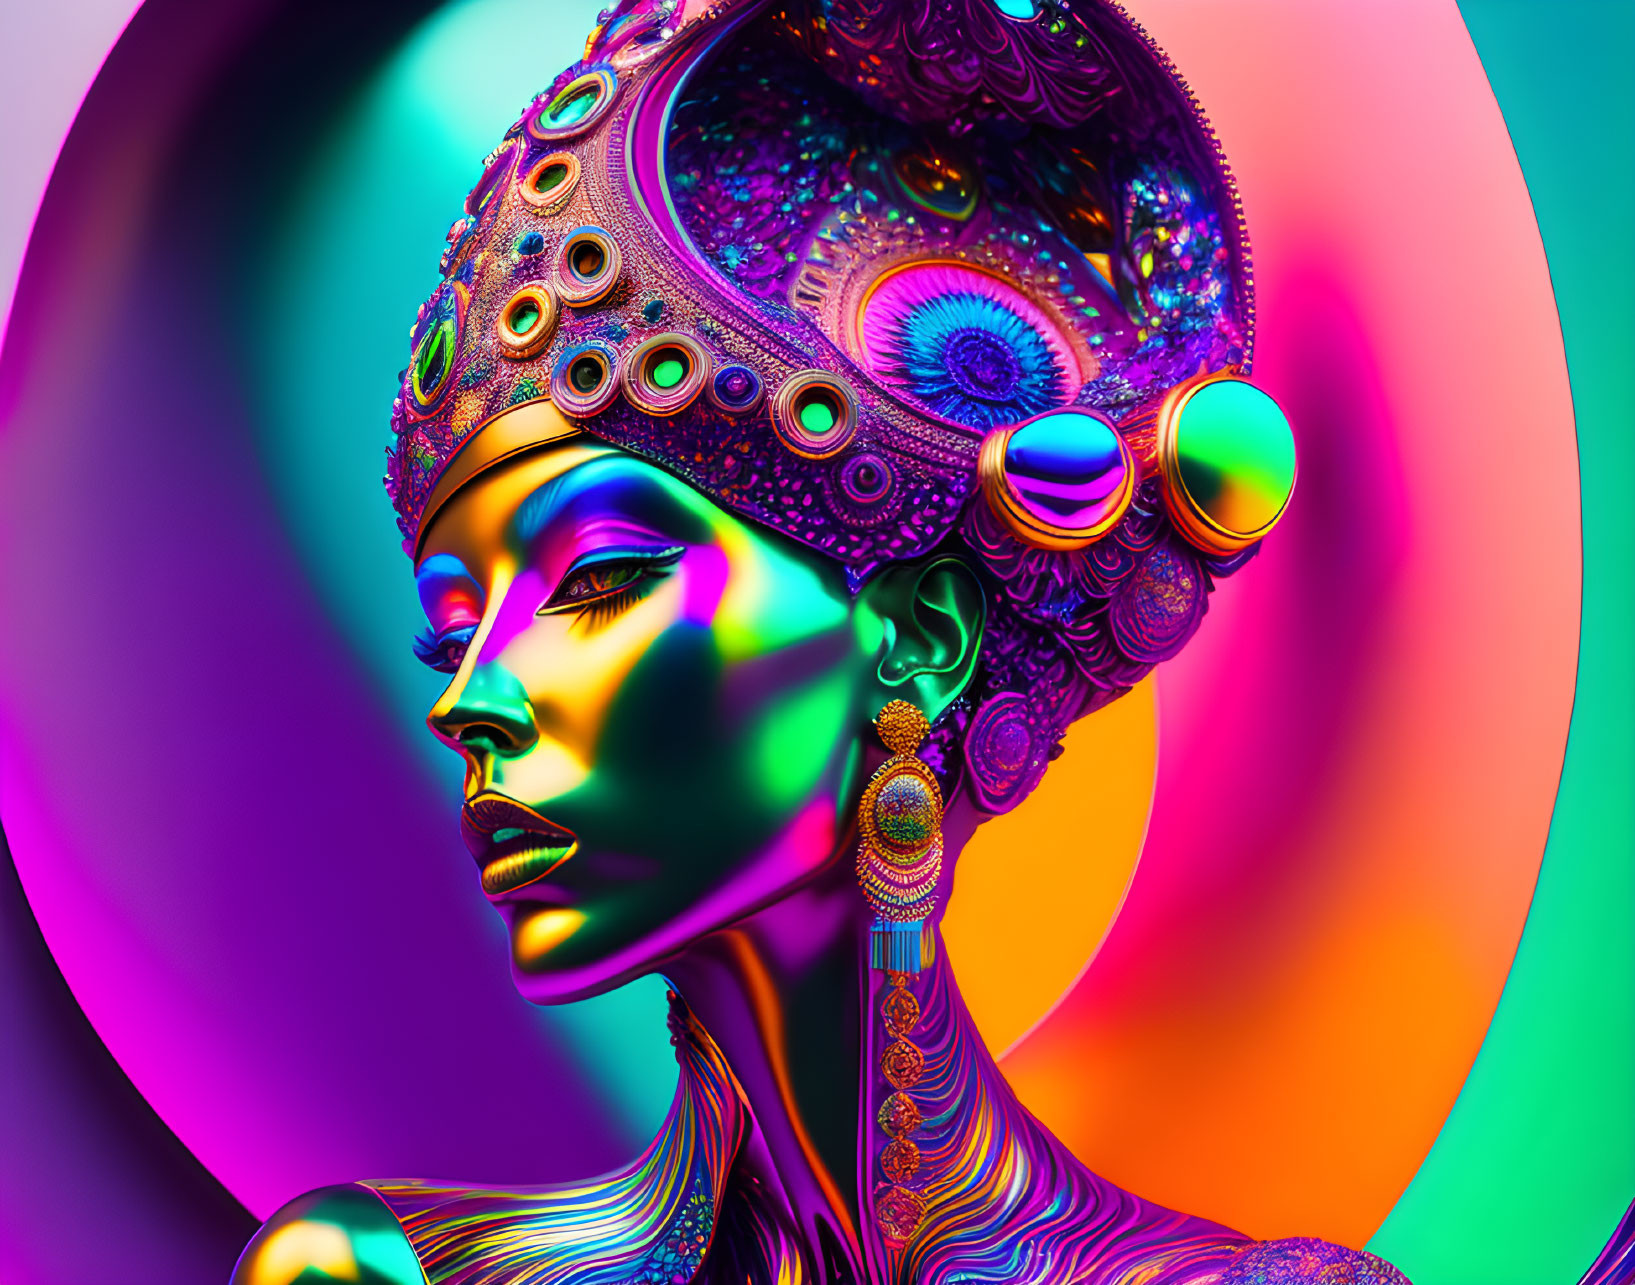 Colorful digital artwork of woman with intricate headgear and jewelry